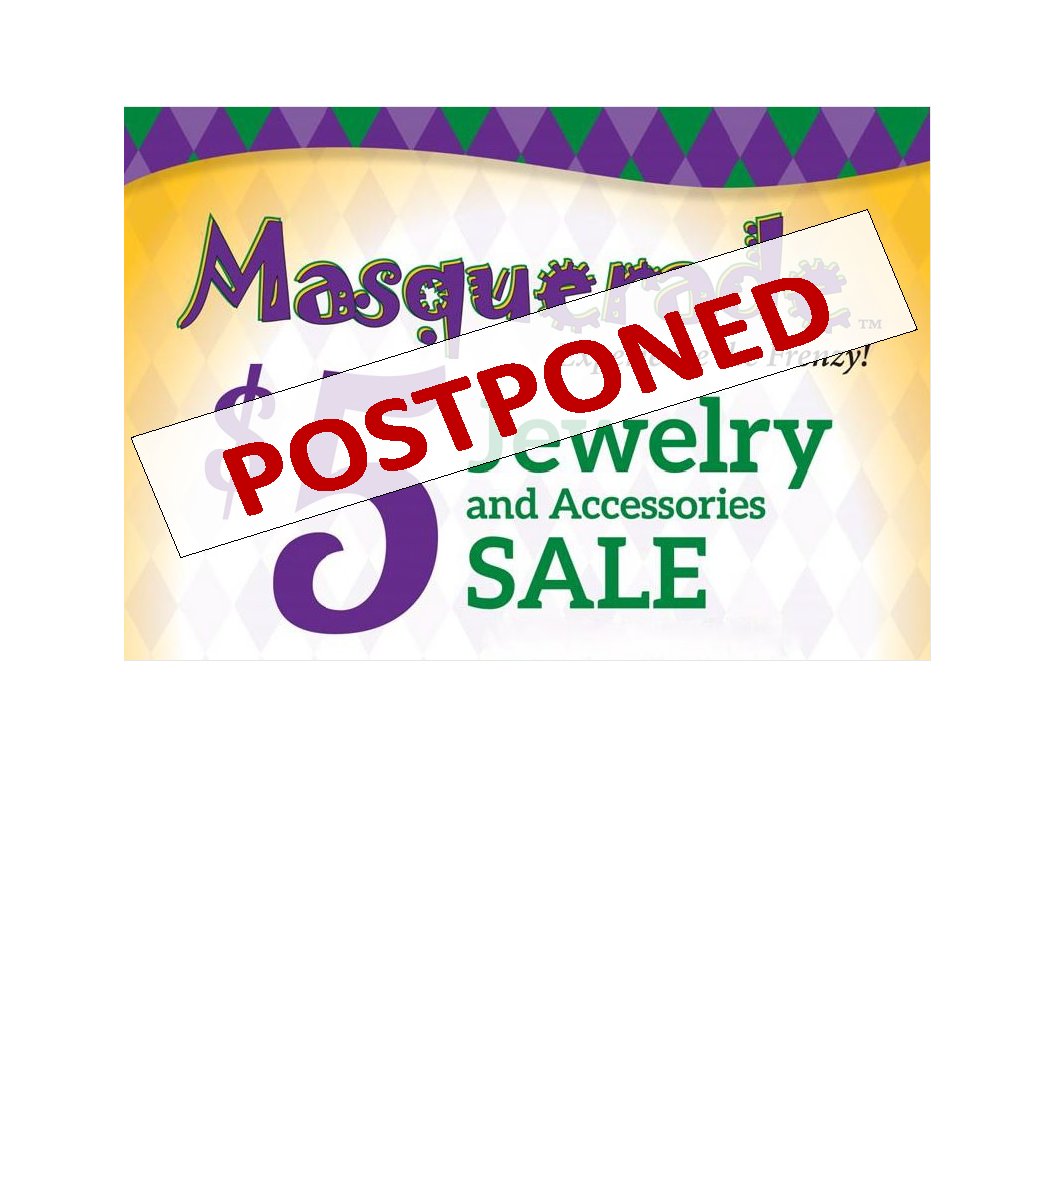 POSTPONED Due to unforeseen events – we are postponing our Masquerade $5 jewelry and accessories sale. We apologize for the inconvenience.